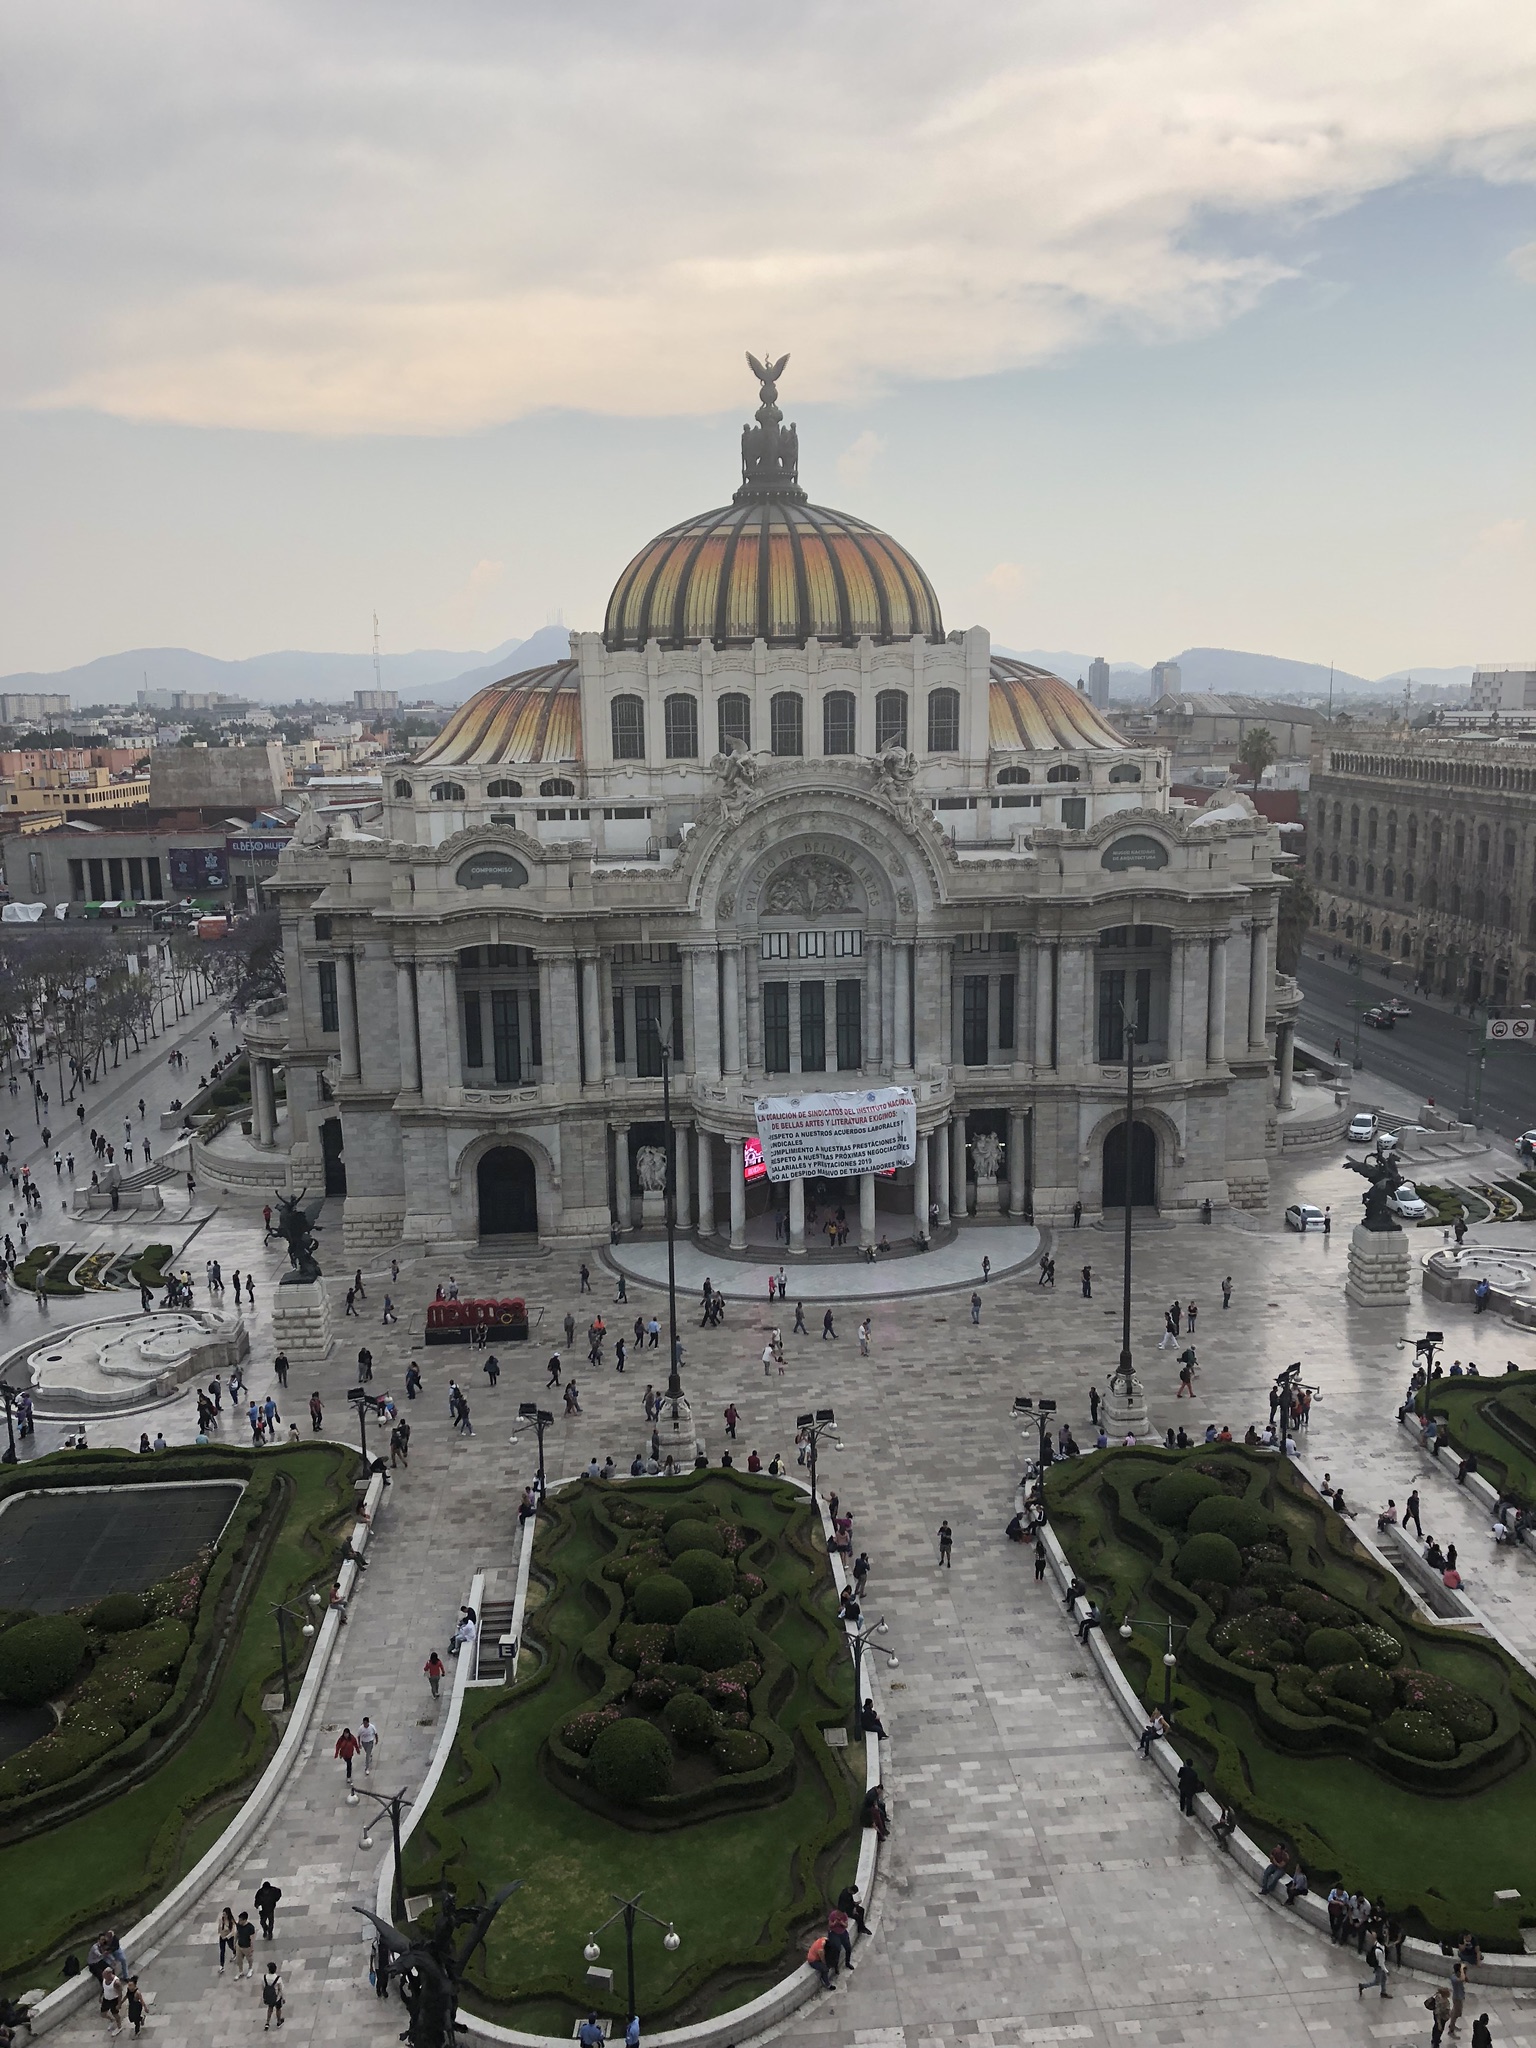 The Historic Center of Mexico City